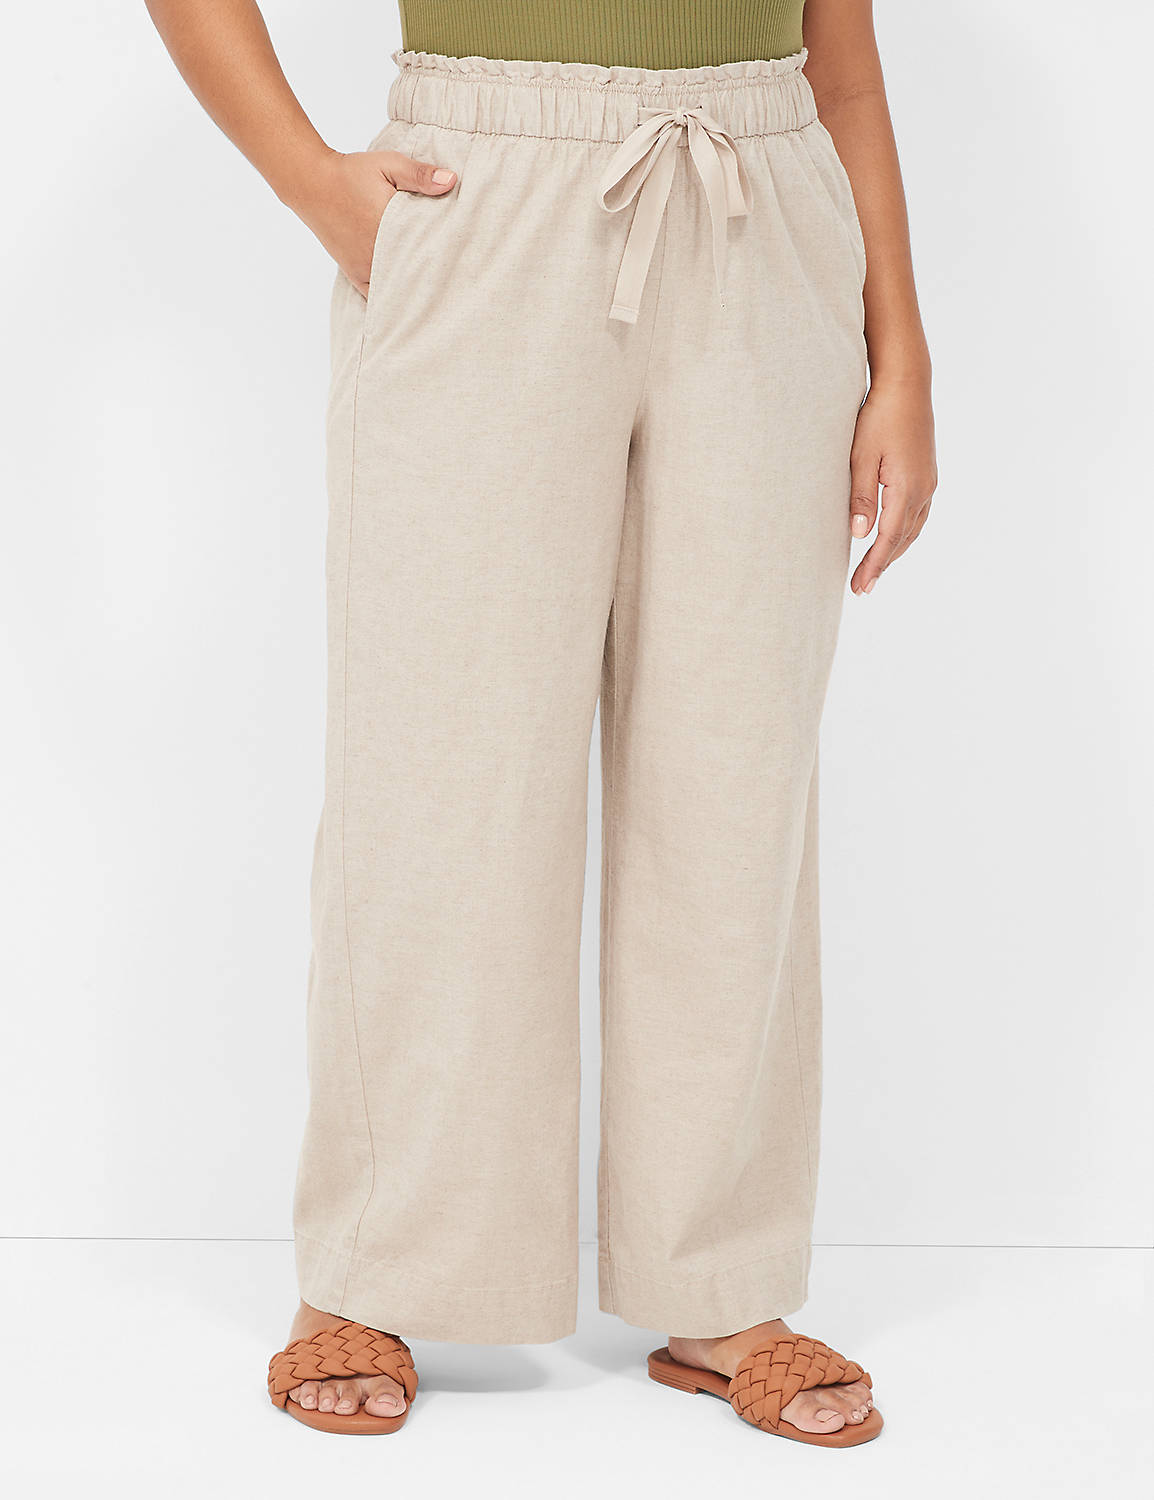 The Softest Wideleg - Linen 1141254 Product Image 1